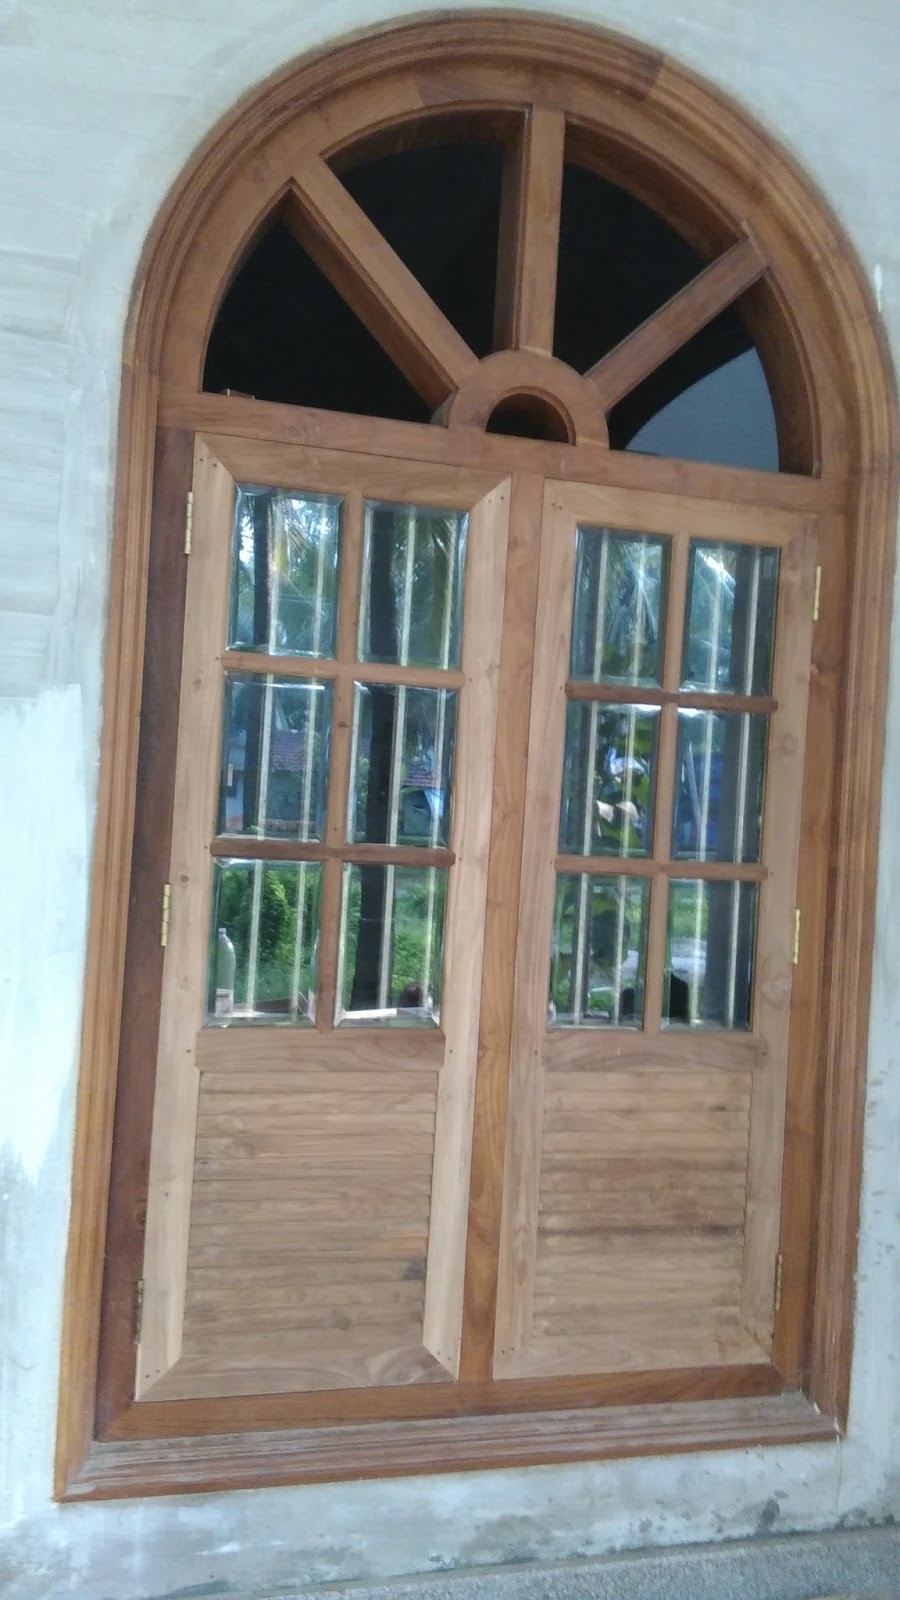 kerala style Carpenter works and designs: October 2015